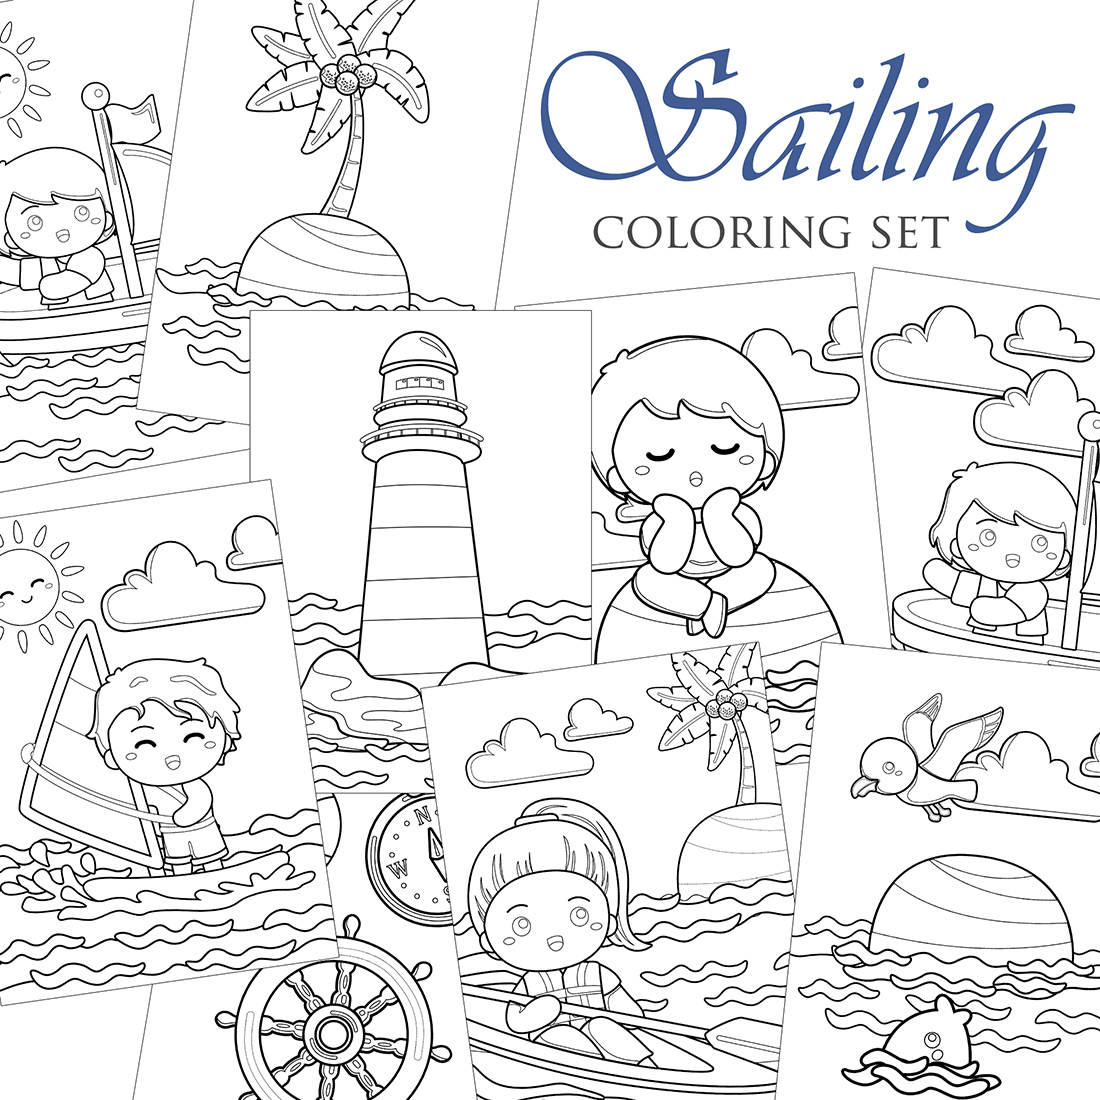 Sailing Nautical Sea Coloring Pages Activity For Kids And Adult cover image.